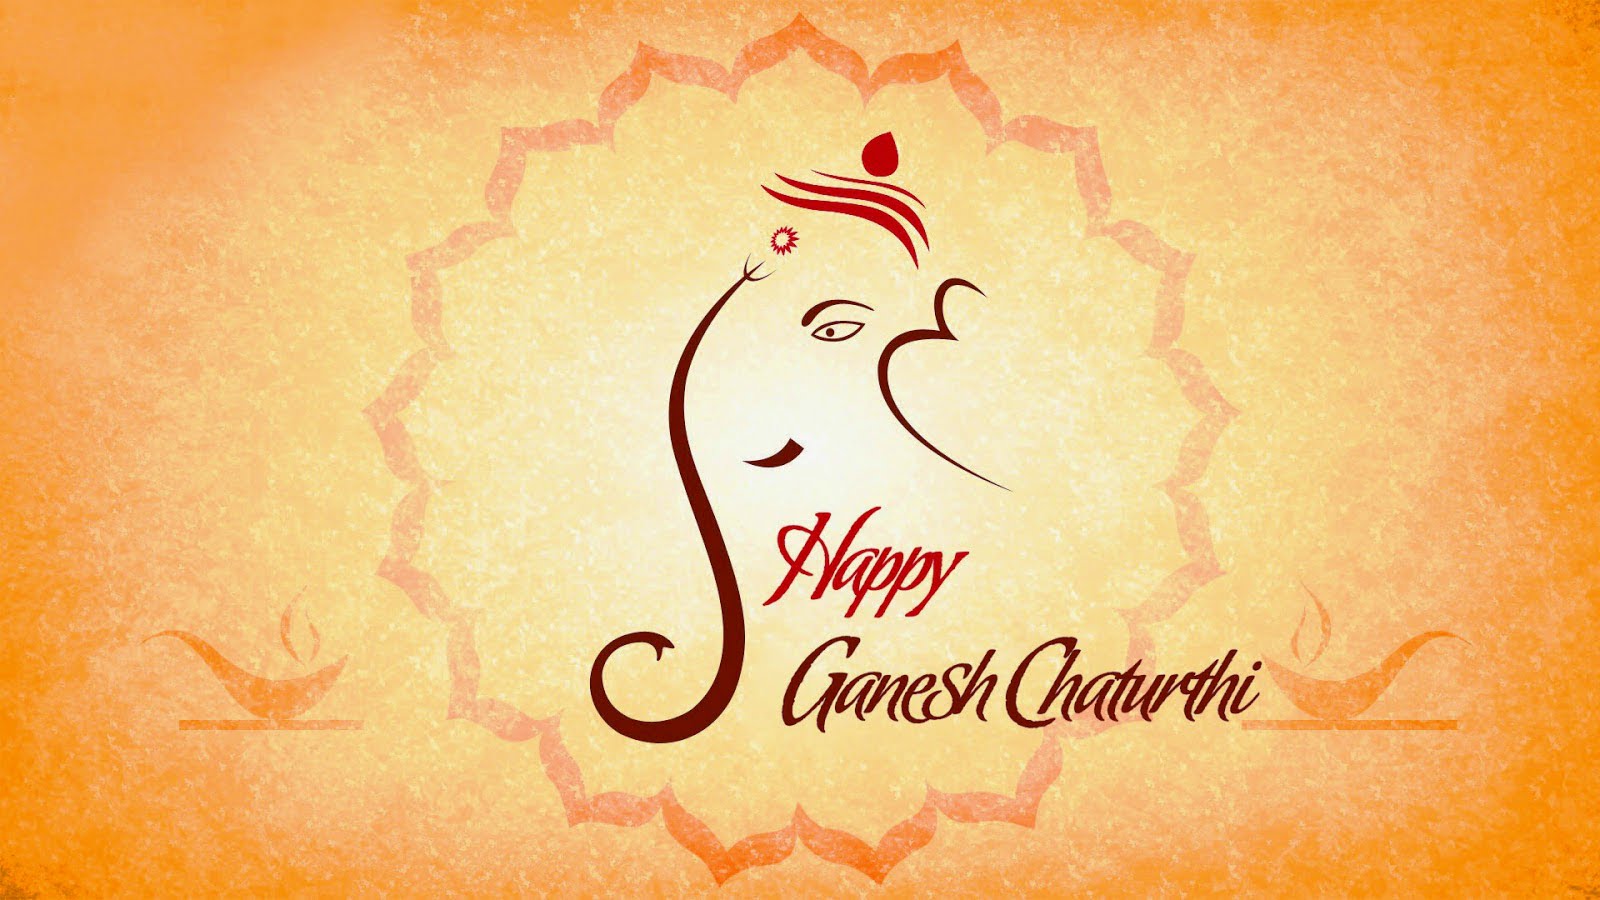 happy-ganesh-chaturthi-wishes-sms-hd-wallpapers-downloads